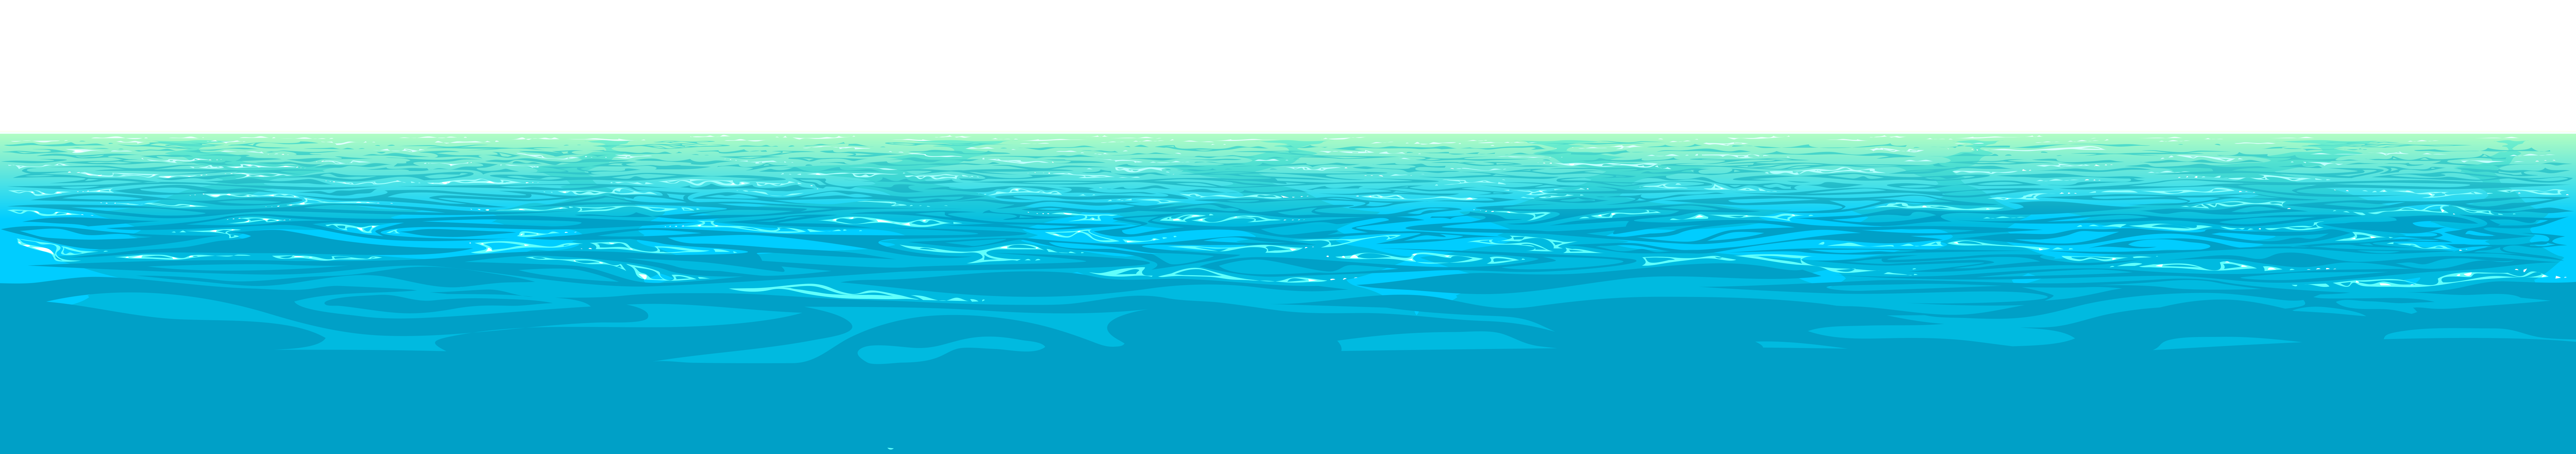 Sea PNG Images Transparent Background | PNG Play